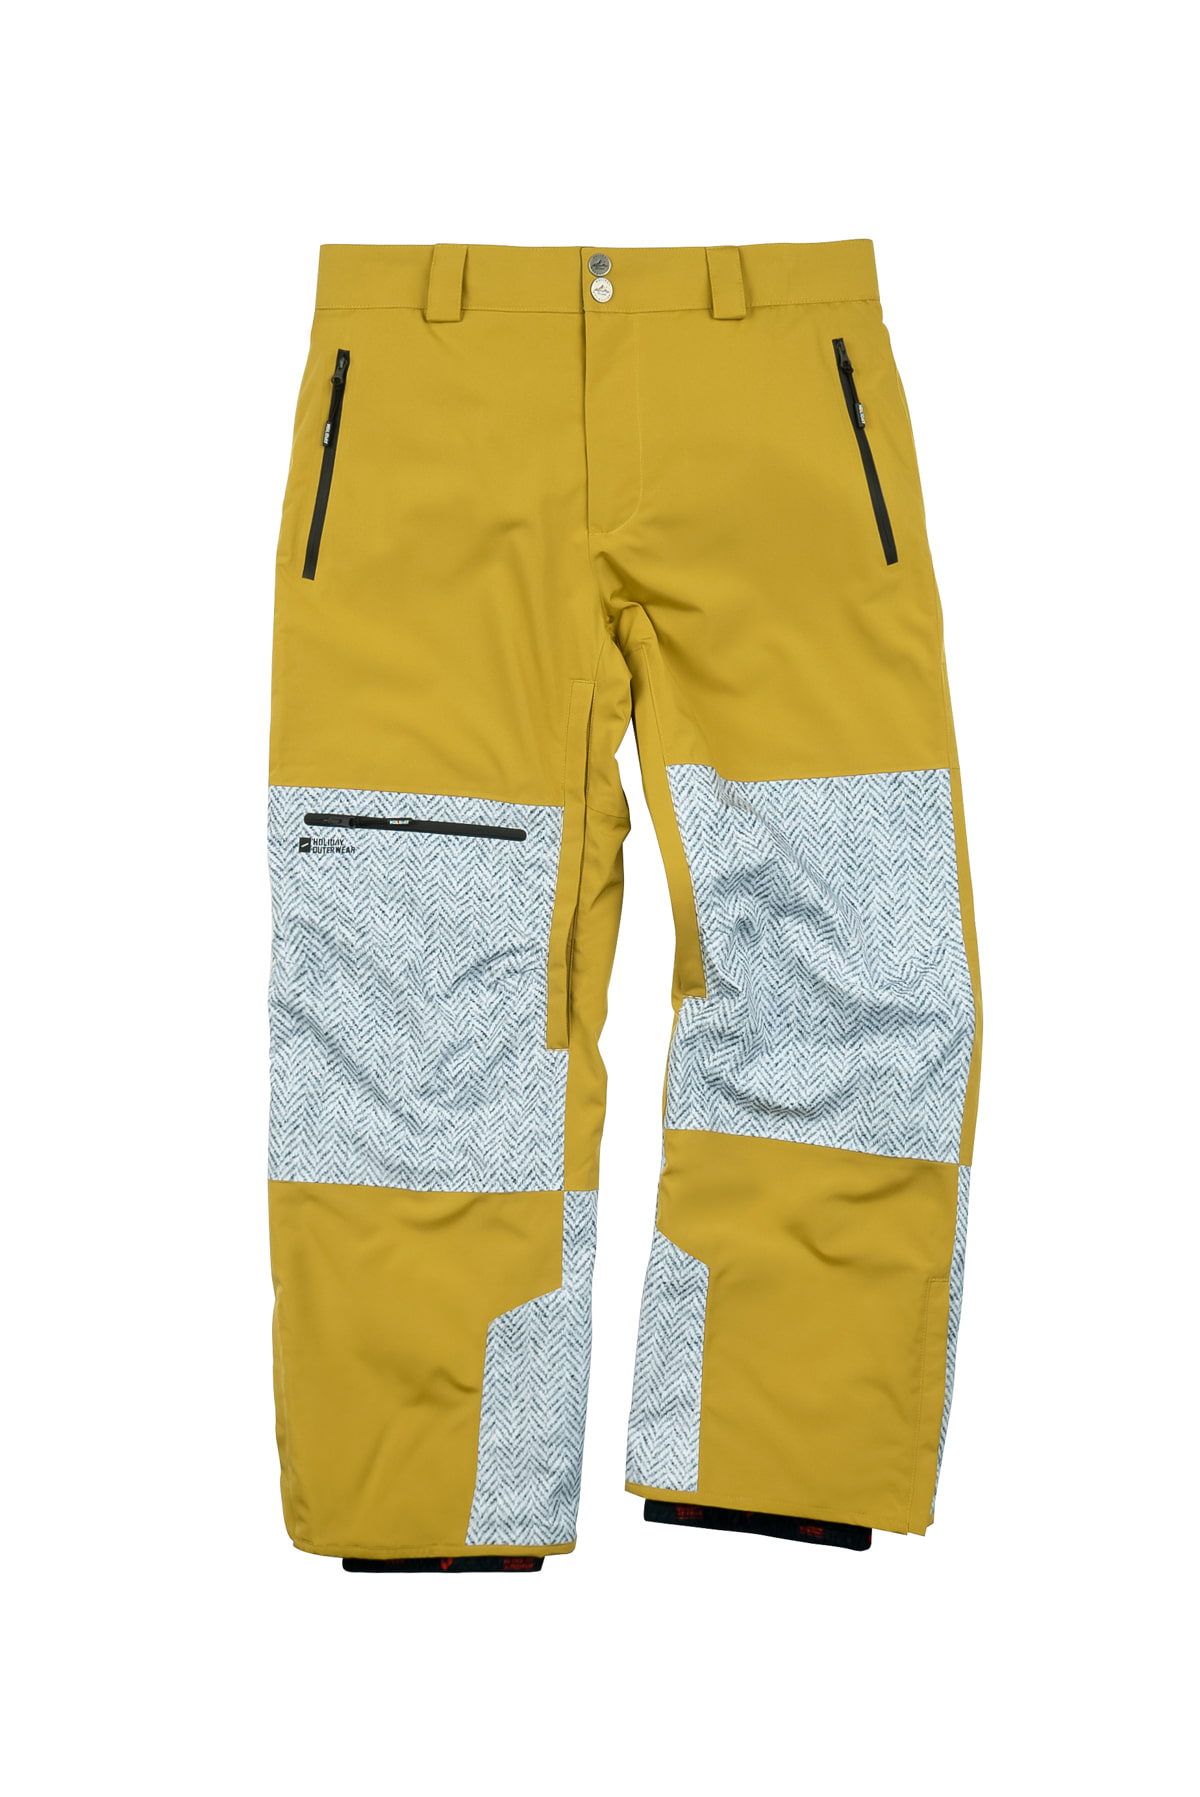 SUMMIT 2L PANTS[2layer]-HONEY GOLDHOLIDAY OUTERWEAR